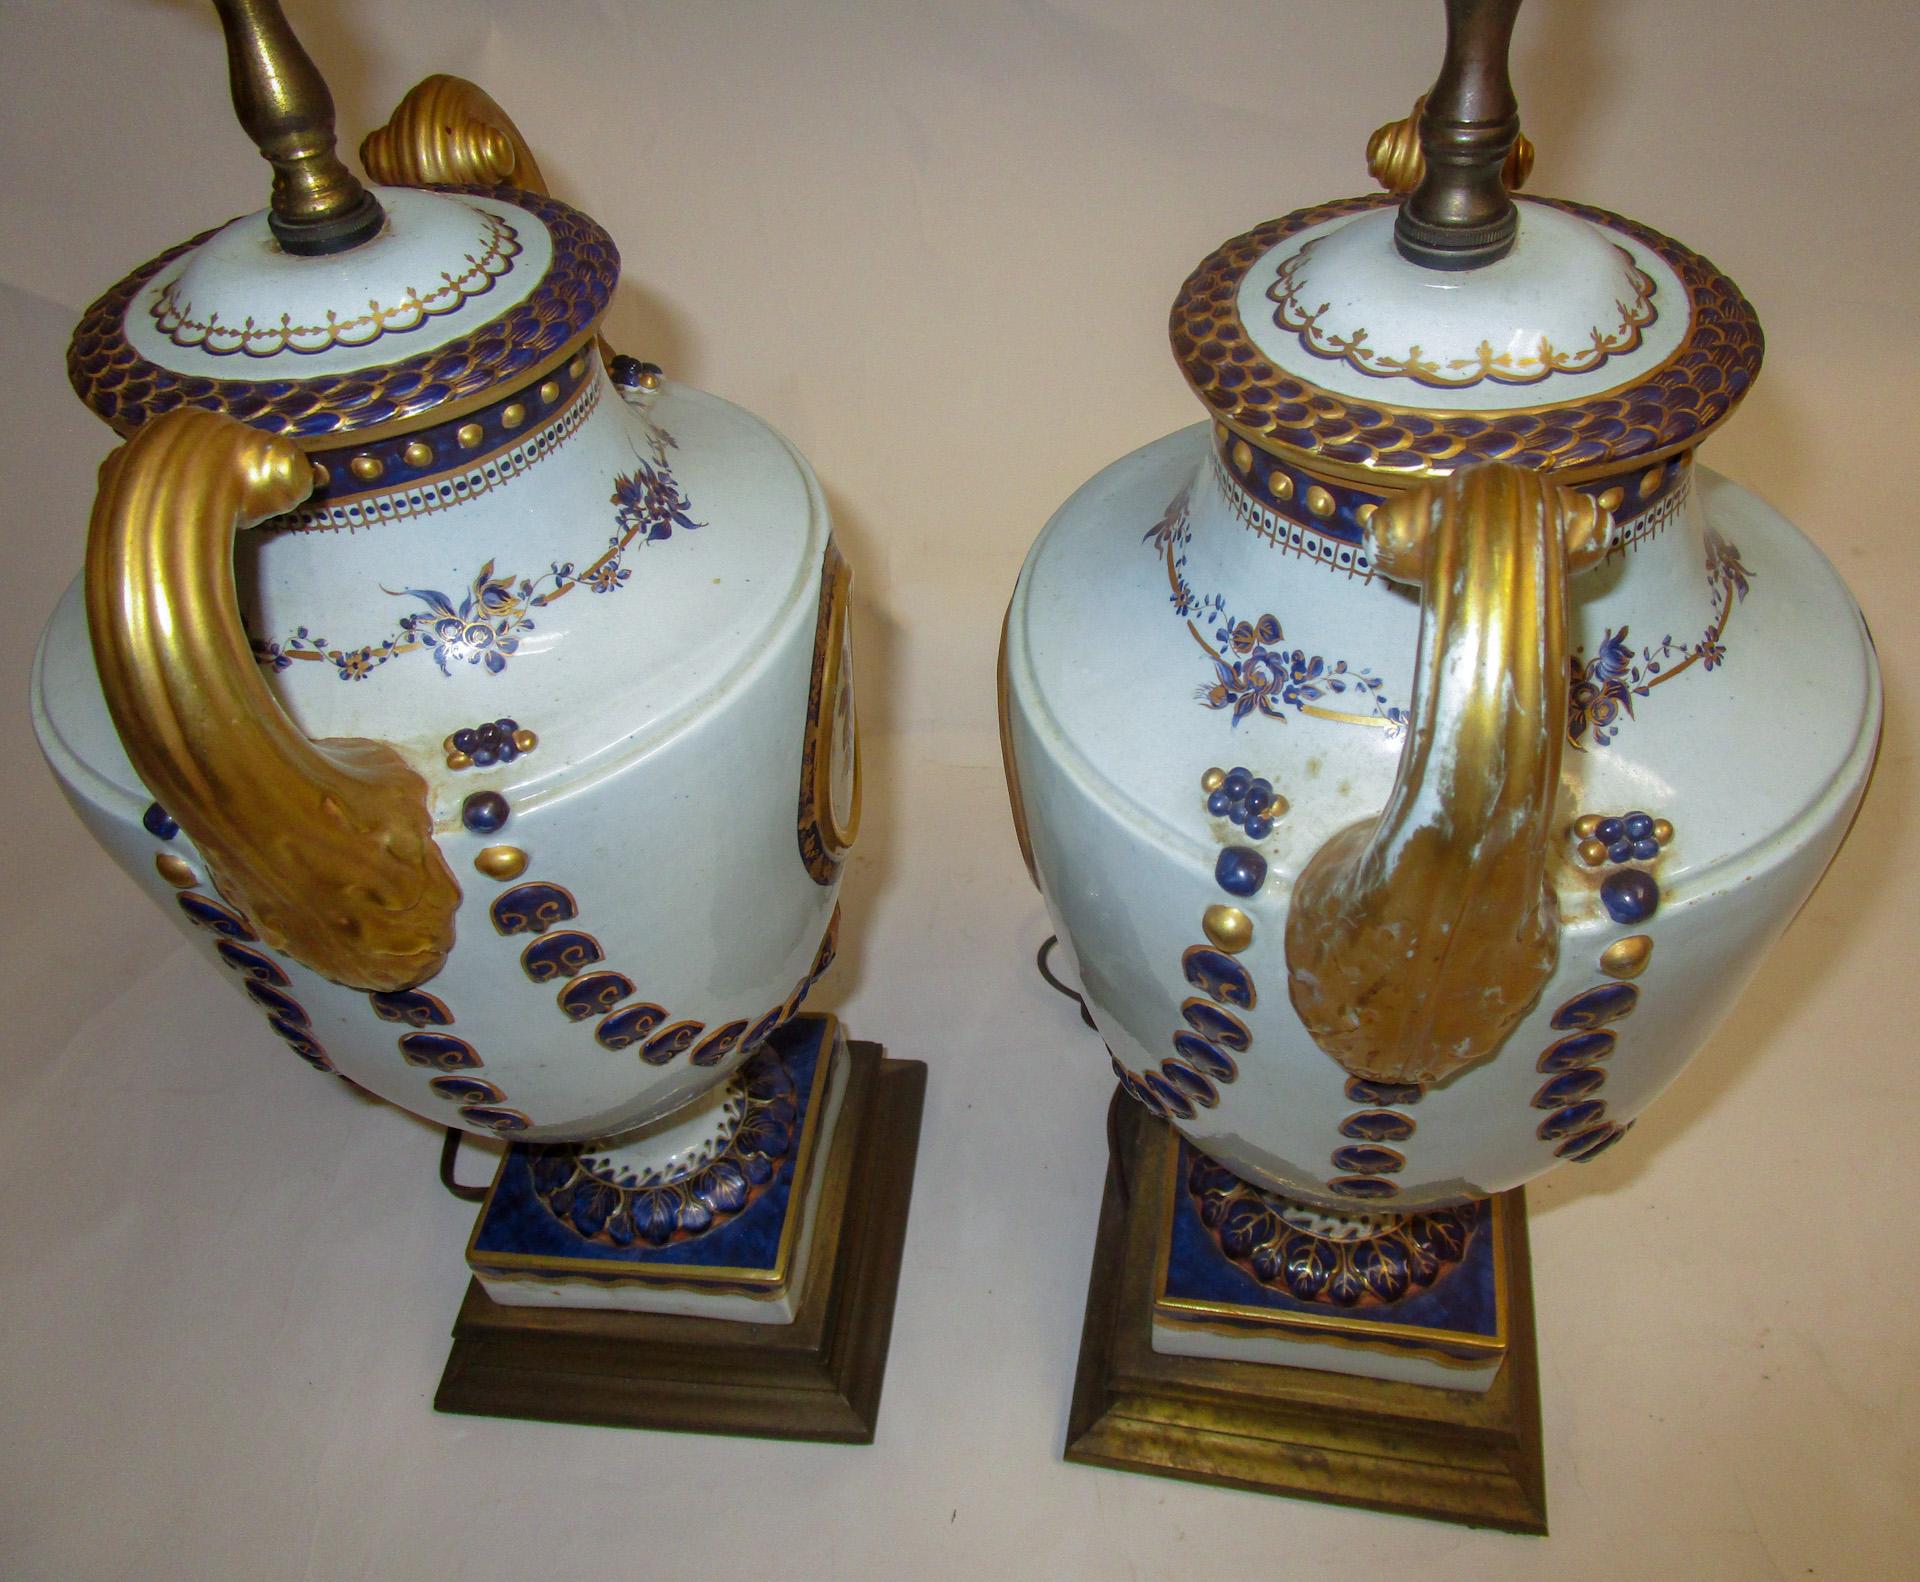 20th Century Porcelain Lamp Pair by Mottahedeh In Good Condition For Sale In Savannah, GA